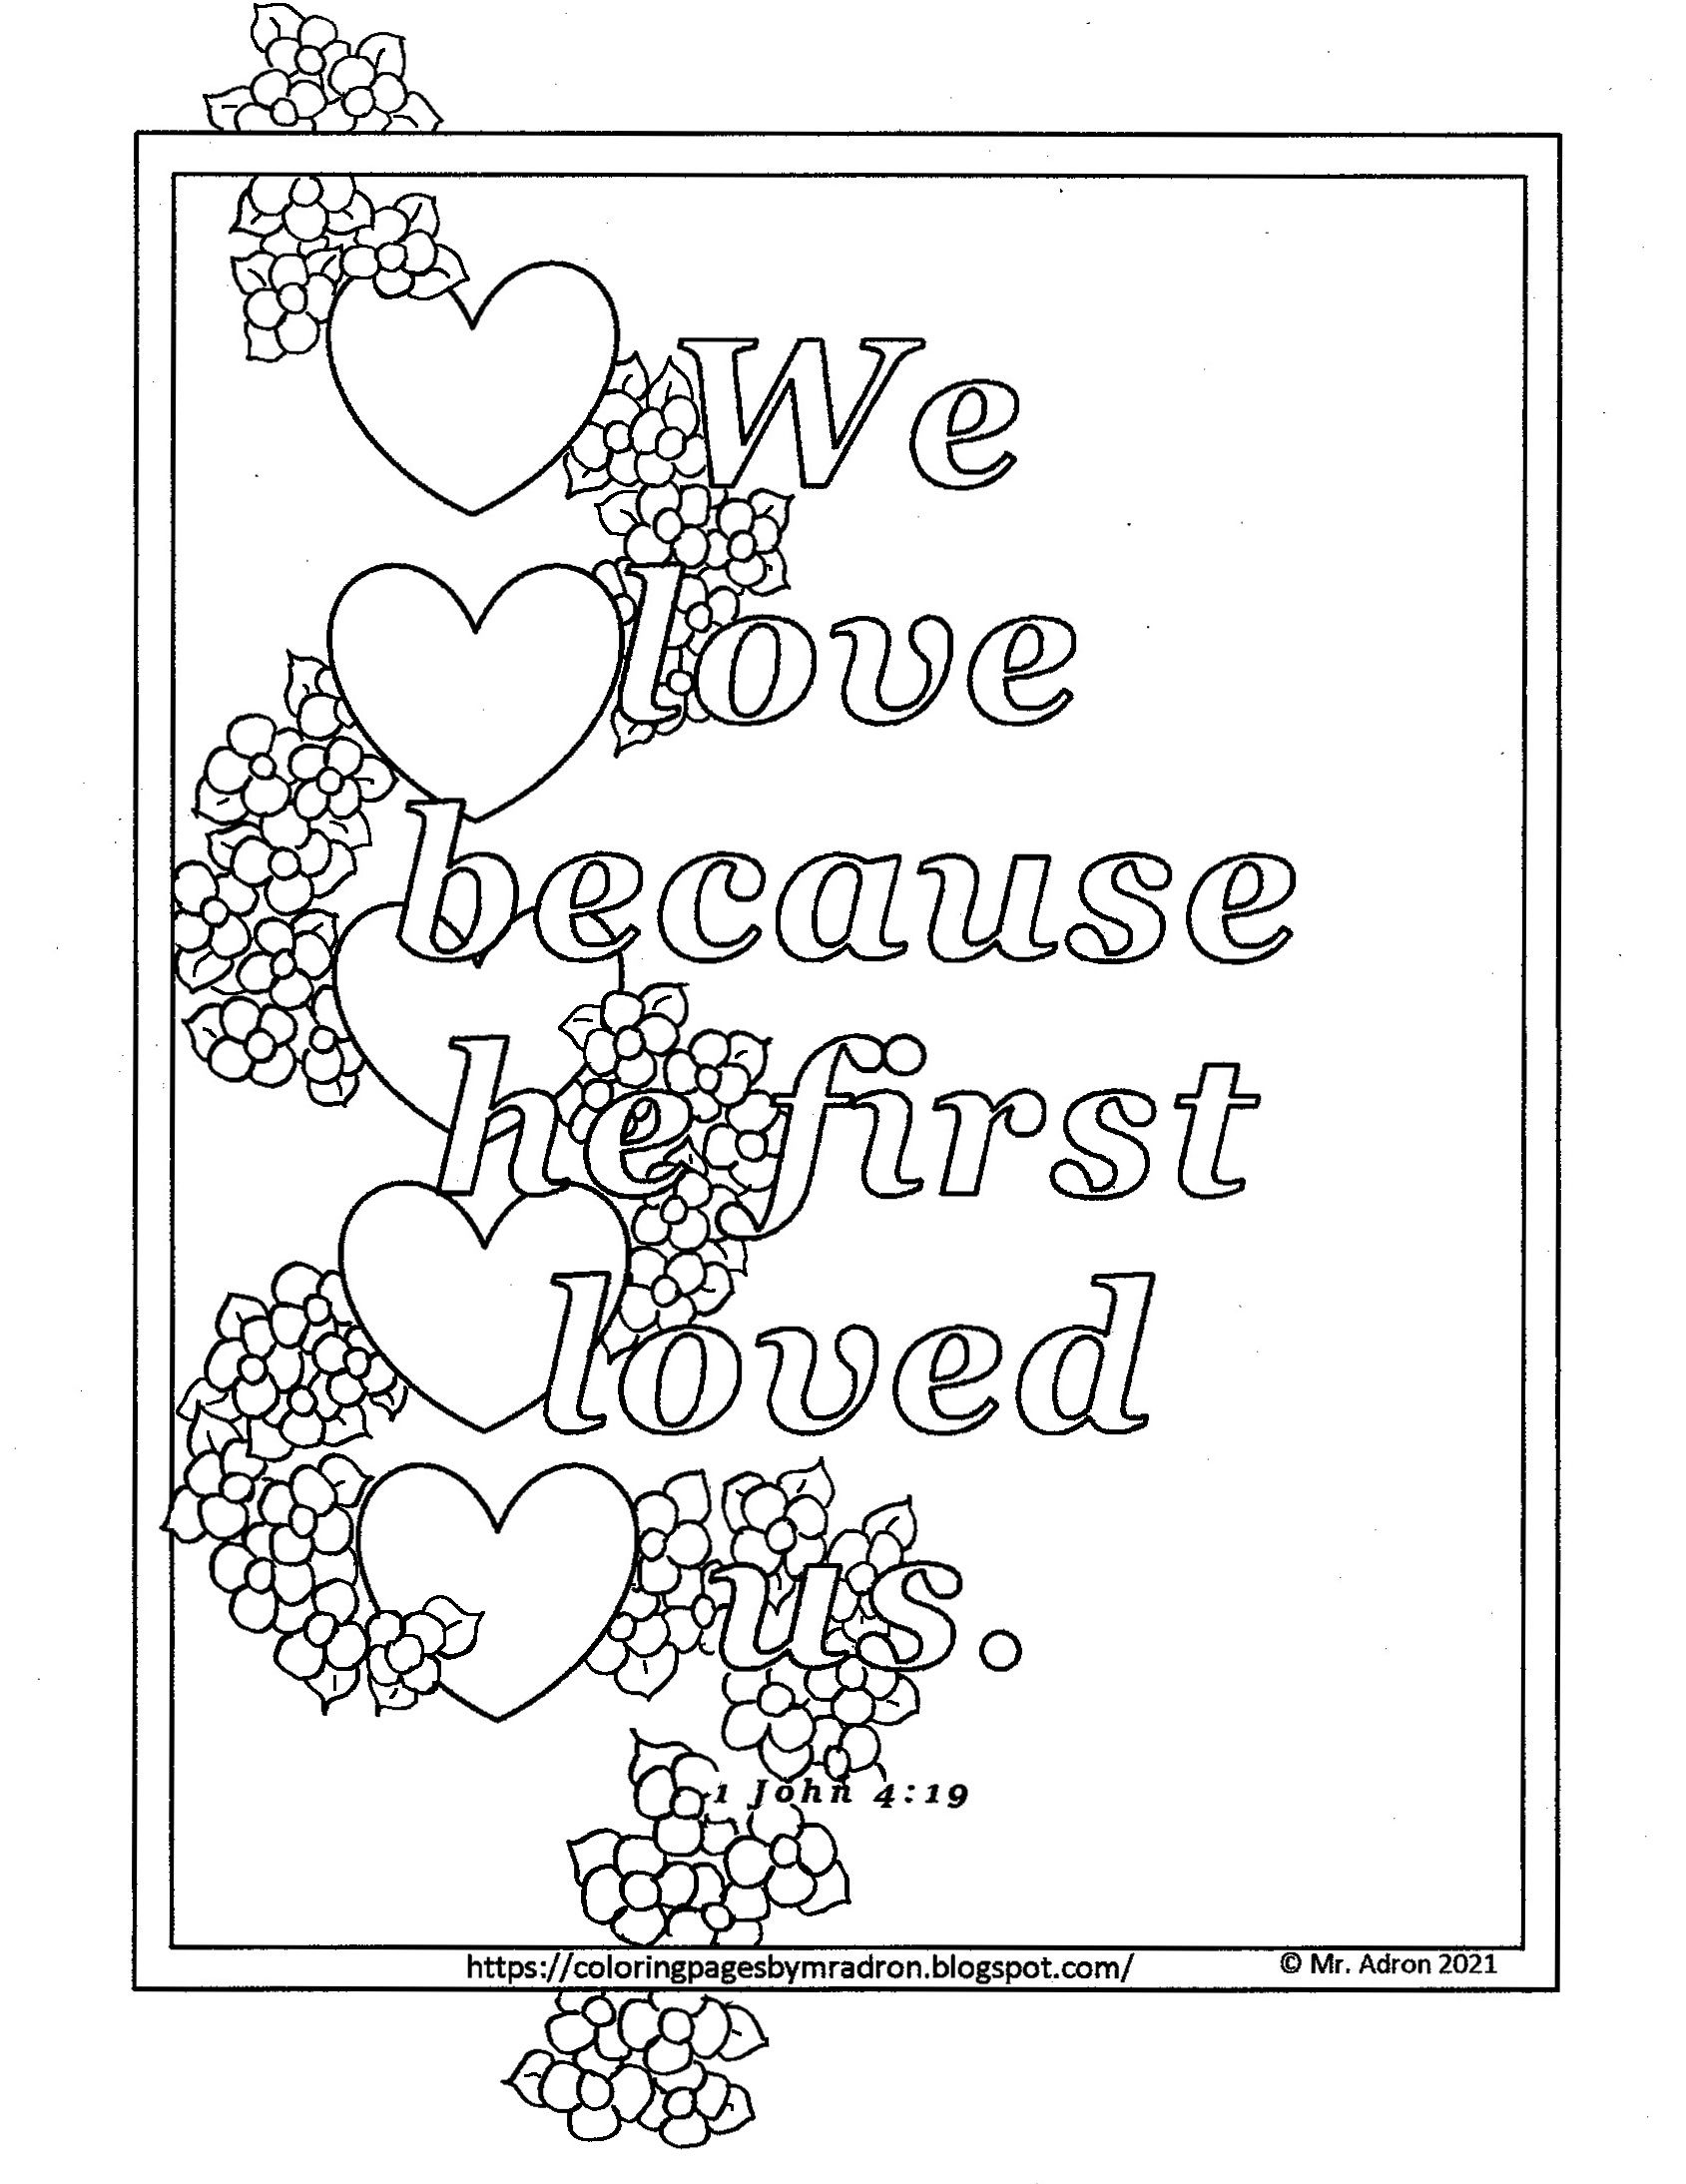 Free john print and color page we love because bible verse bible coloring pages bible verse coloring page preschool coloring pages